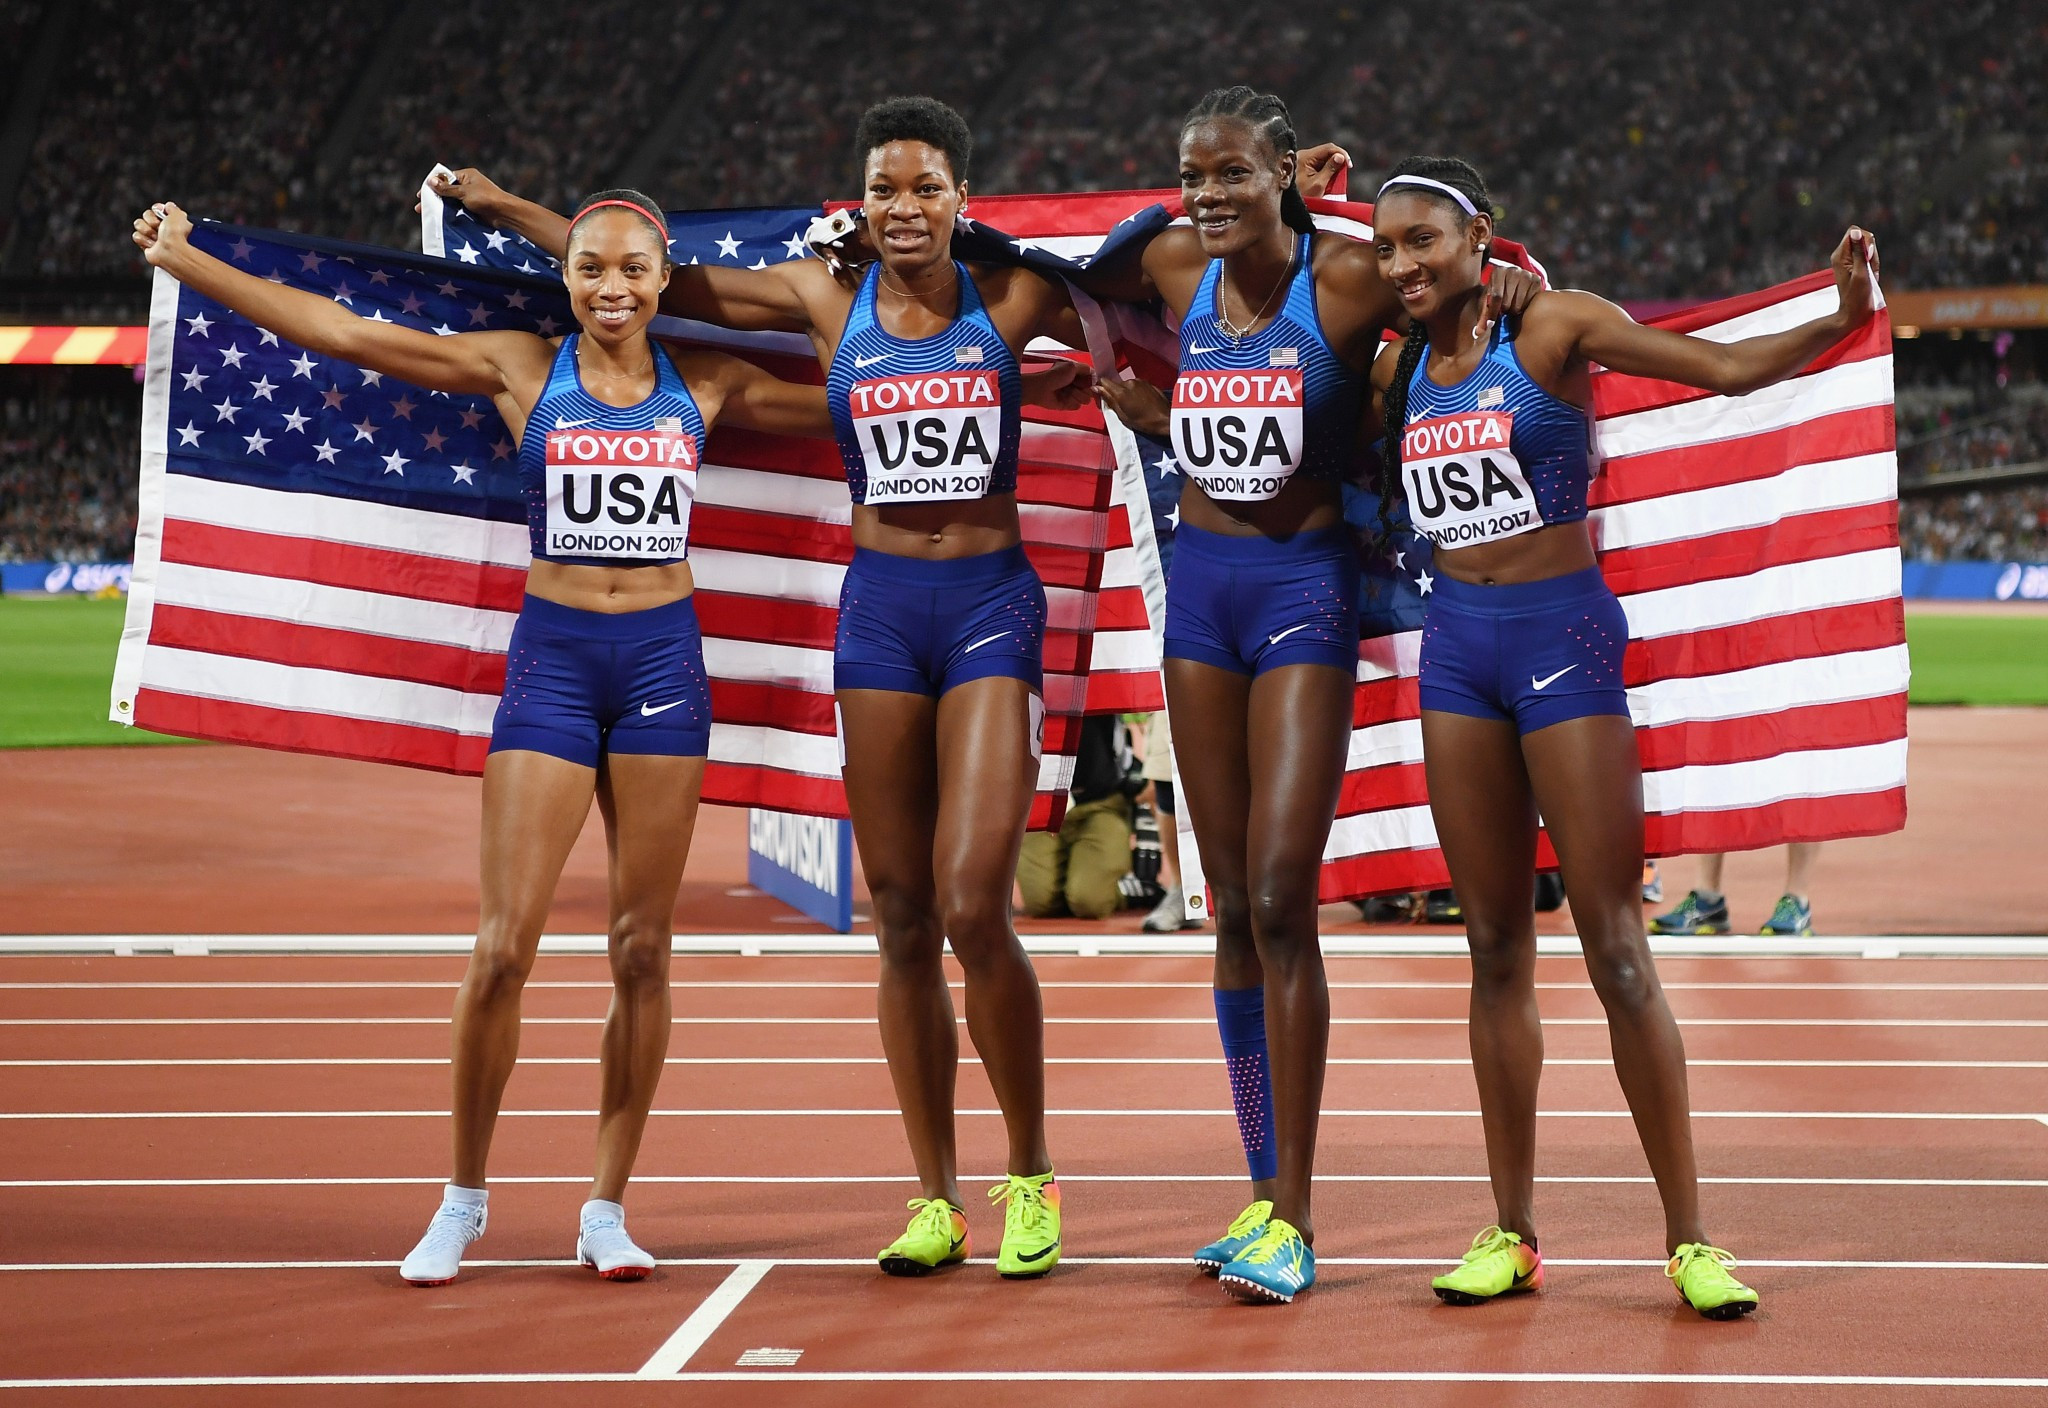 The United States blew the rest of the field out of the water on their way to the women's 4x400m relay crown ©Getty Images